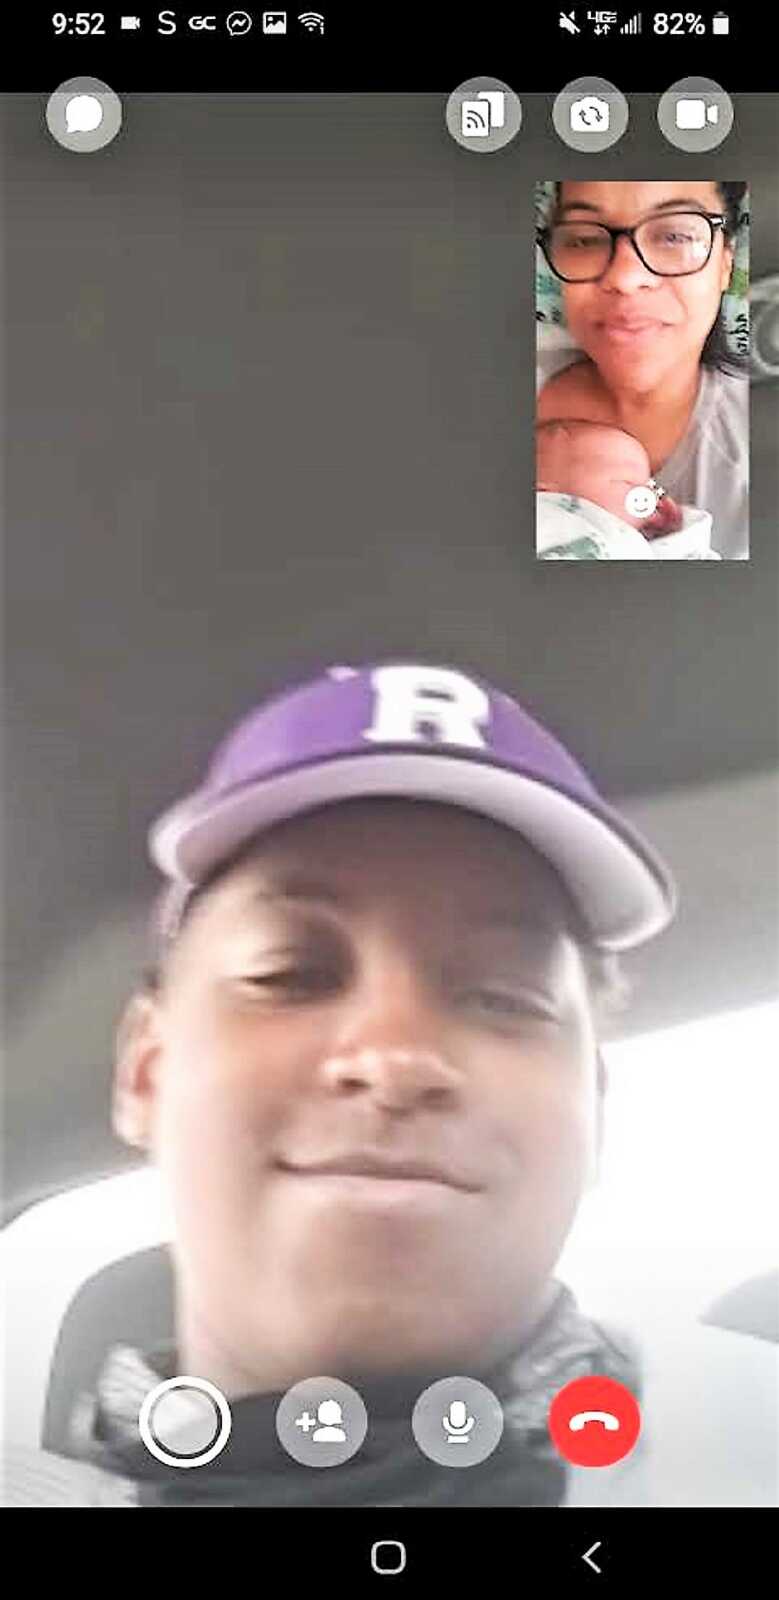 Mom facetimes oldest son while holding newborn in the hospital due to covid restrictions